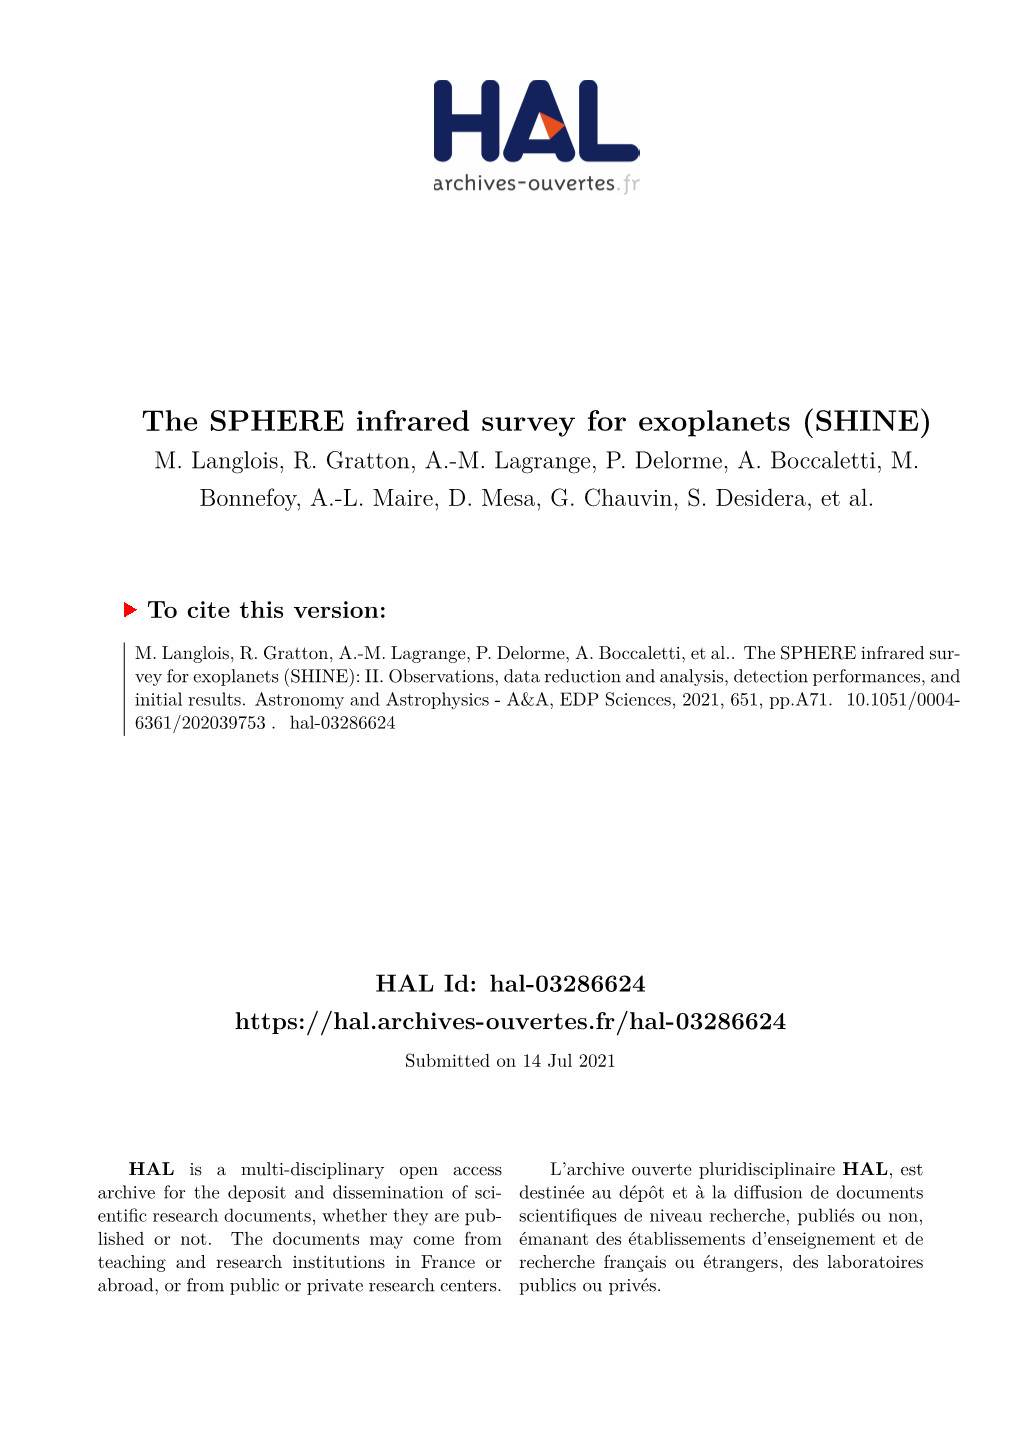 The SPHERE Infrared Survey for Exoplanets (SHINE) M